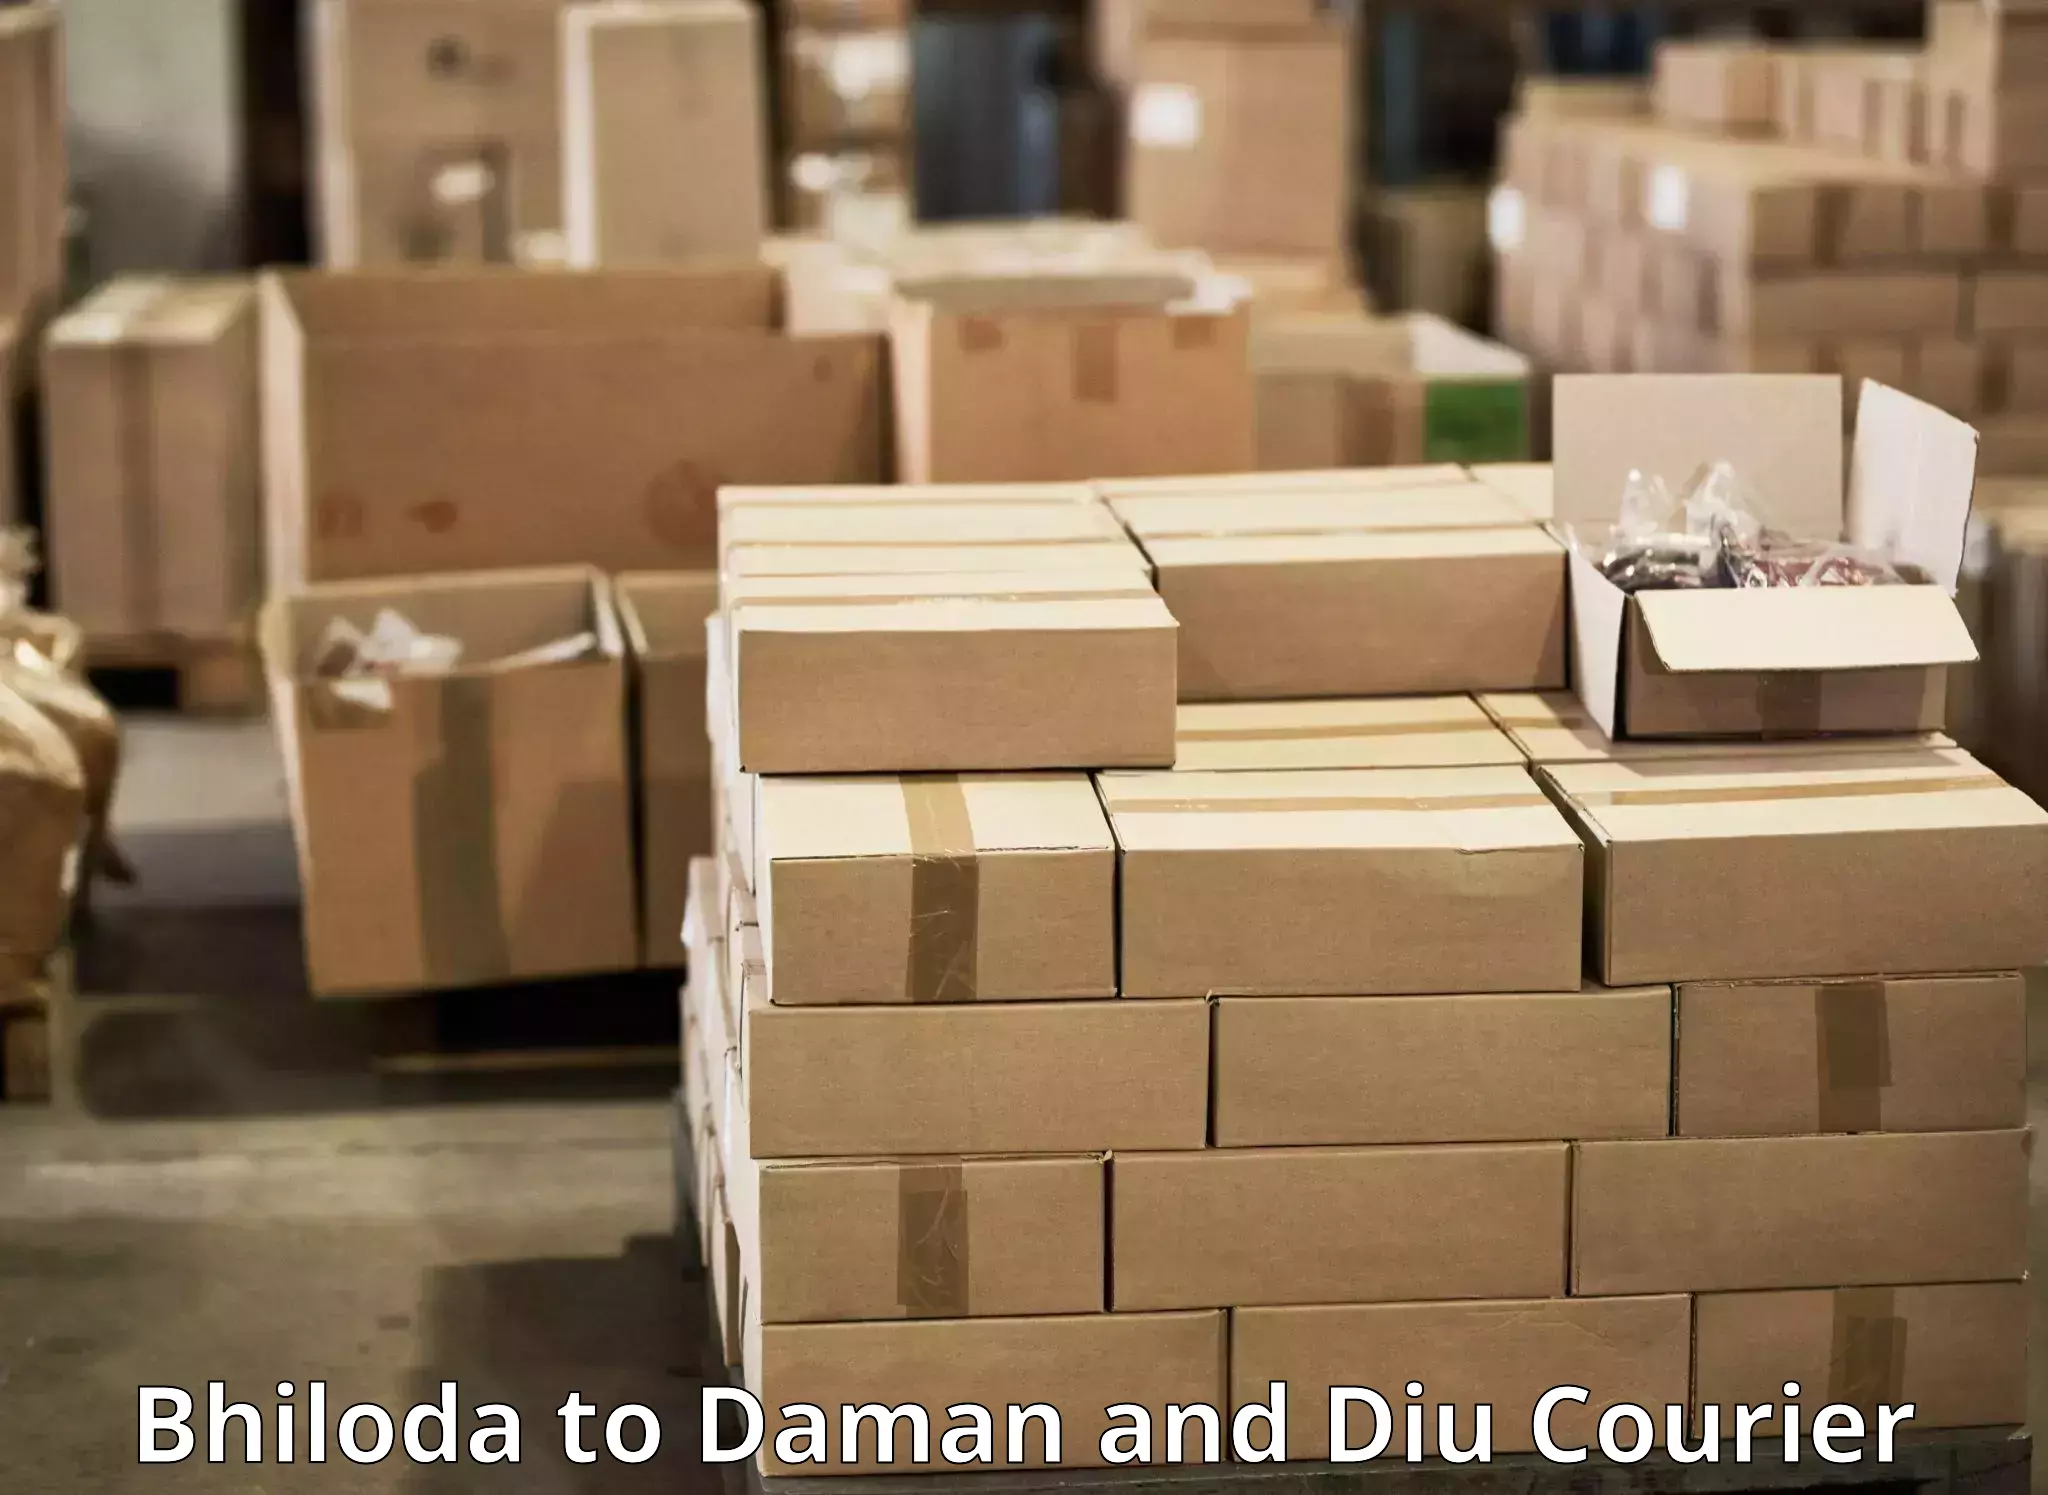 Seamless shipping experience in Bhiloda to Daman and Diu